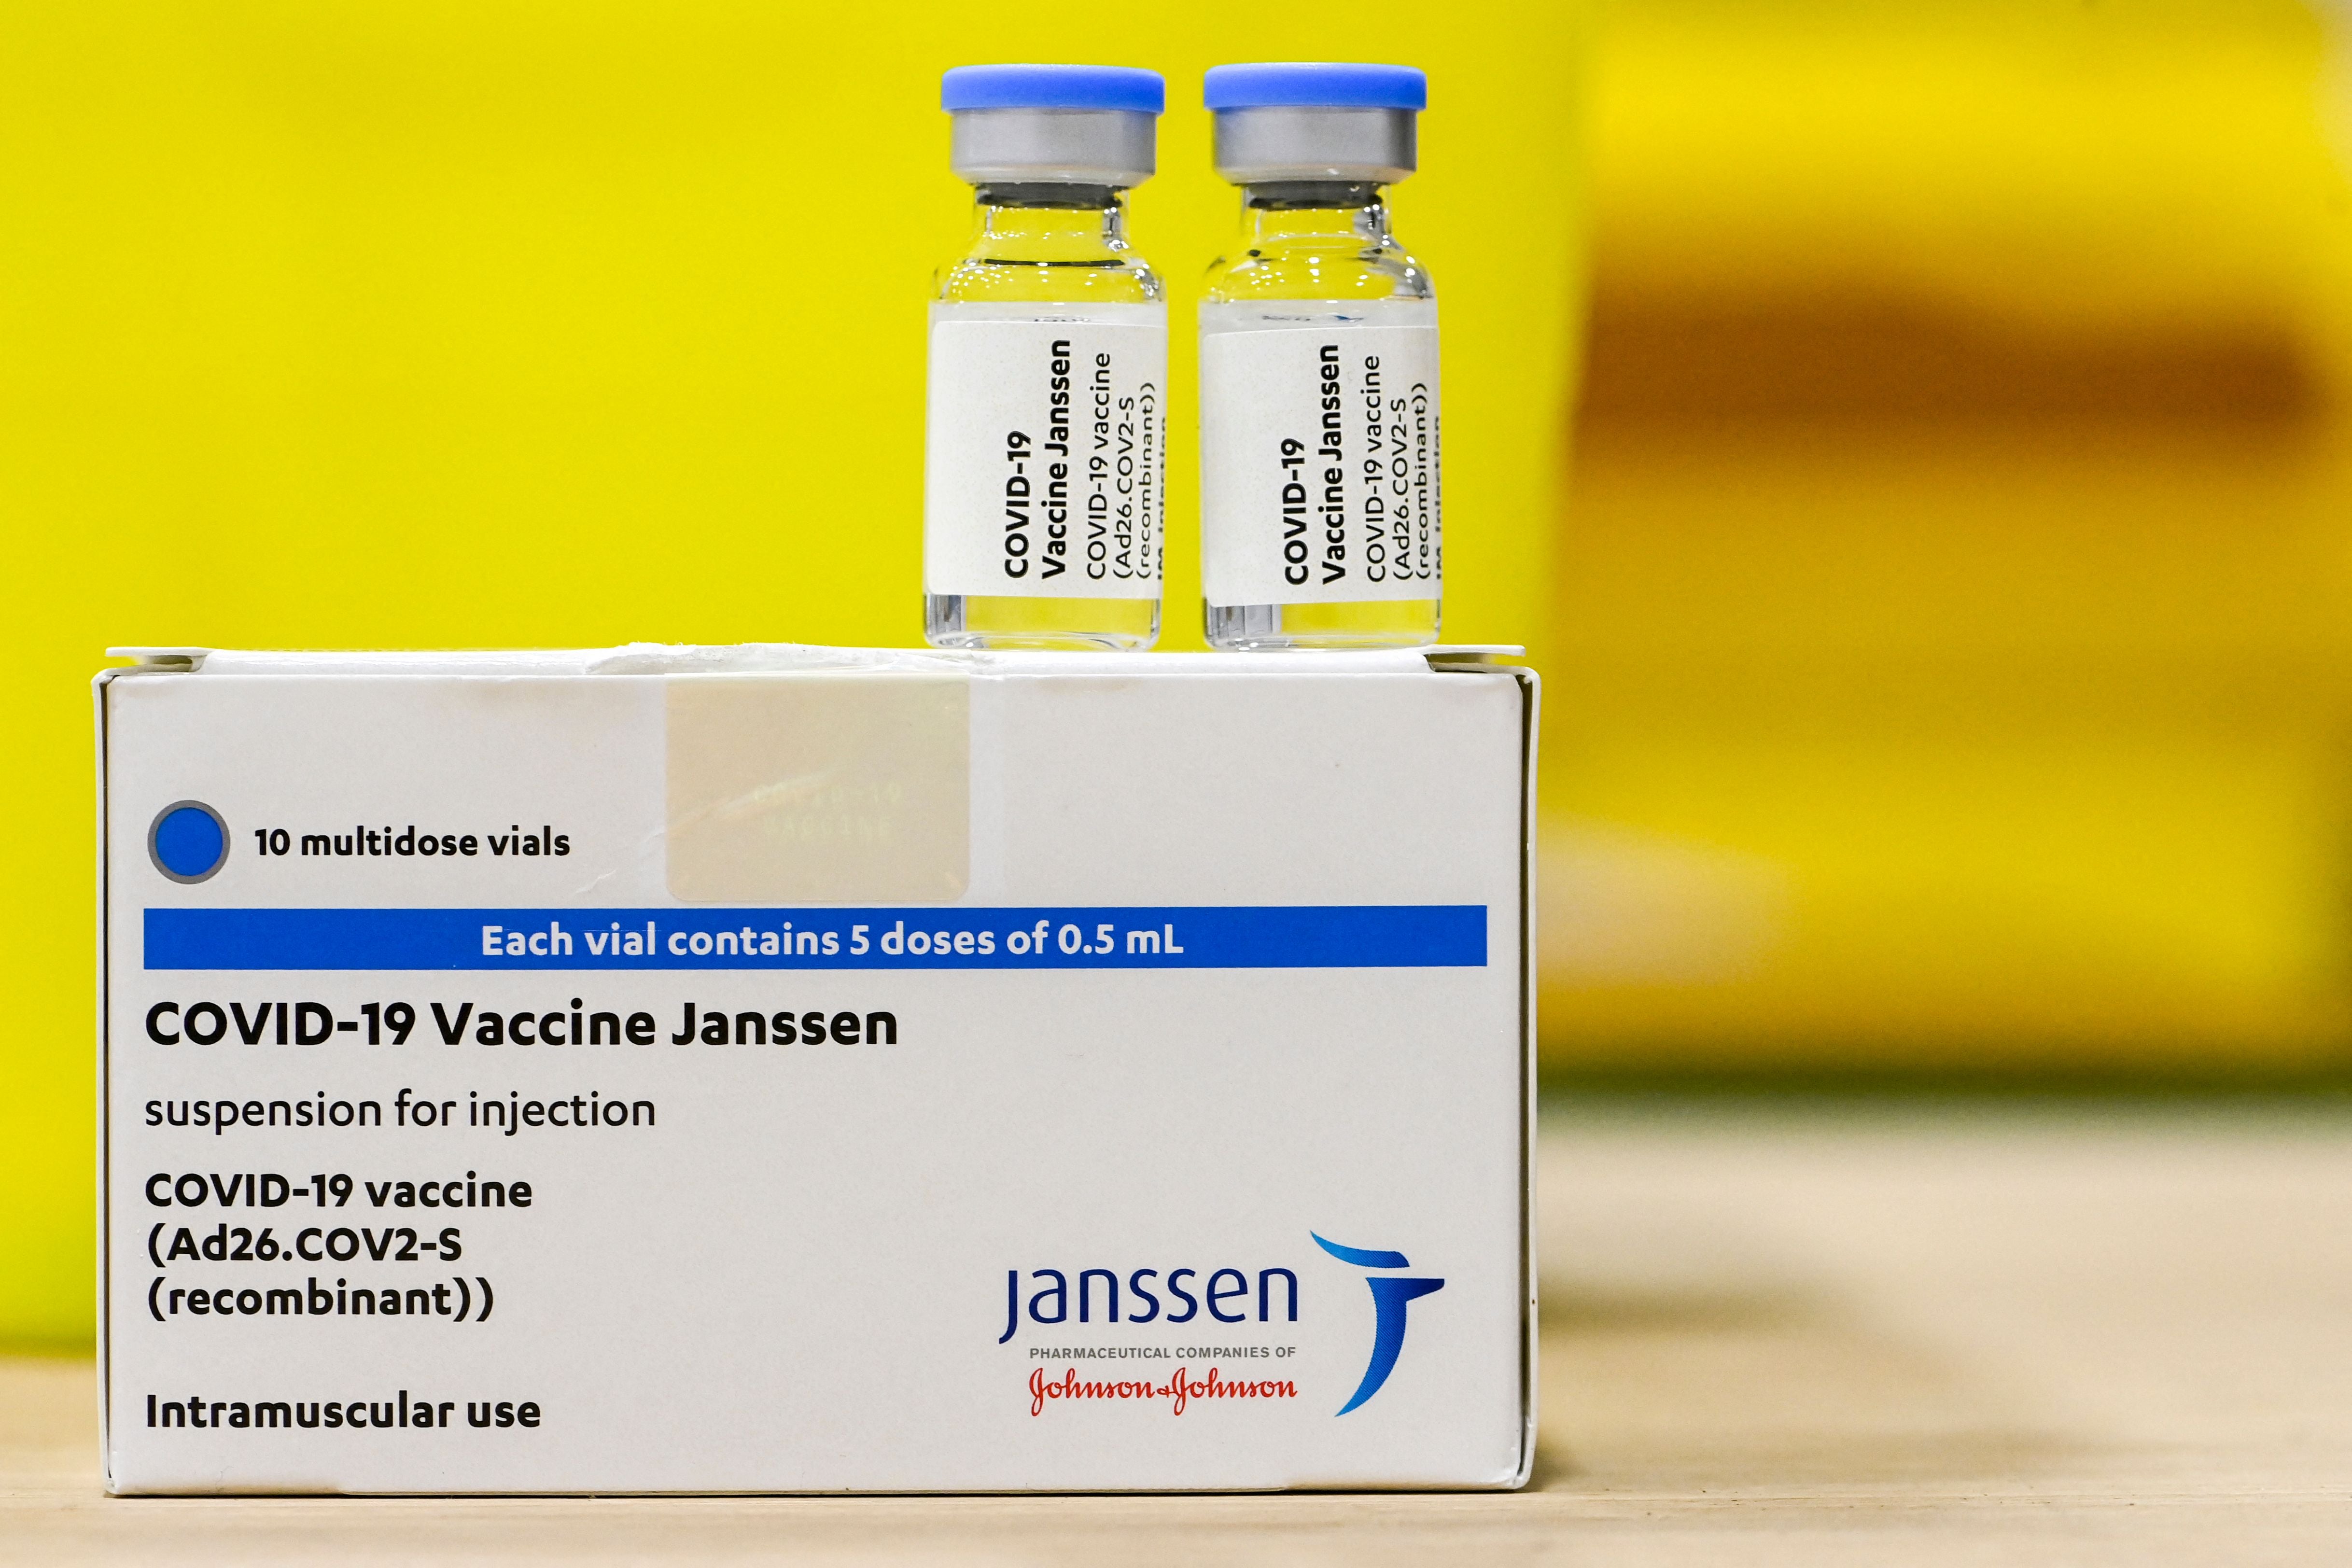 The Janssen jab has been shown to be 67% effective at preventing moderate to severe Covid-19